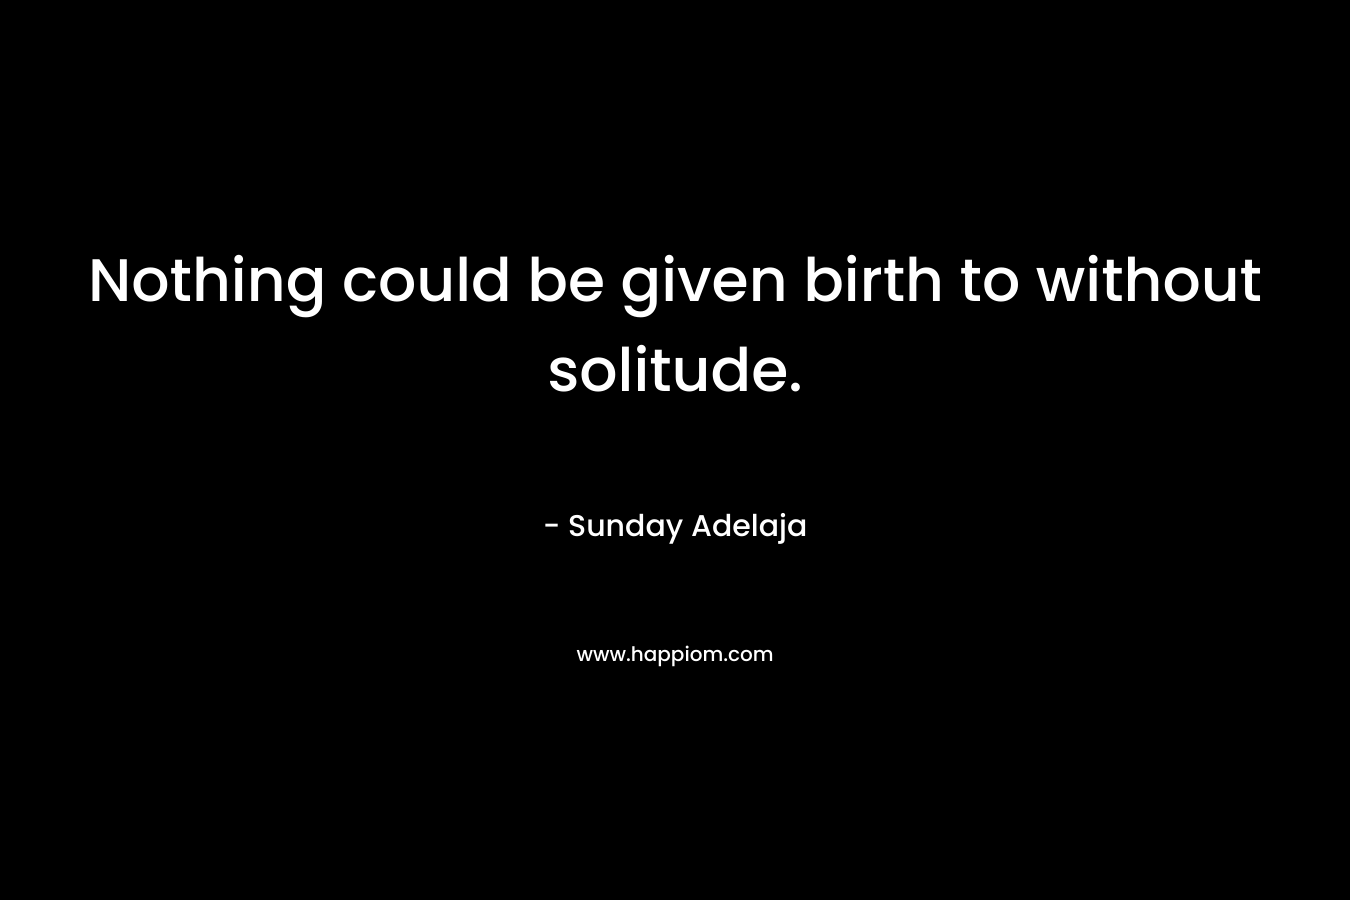 Nothing could be given birth to without solitude.